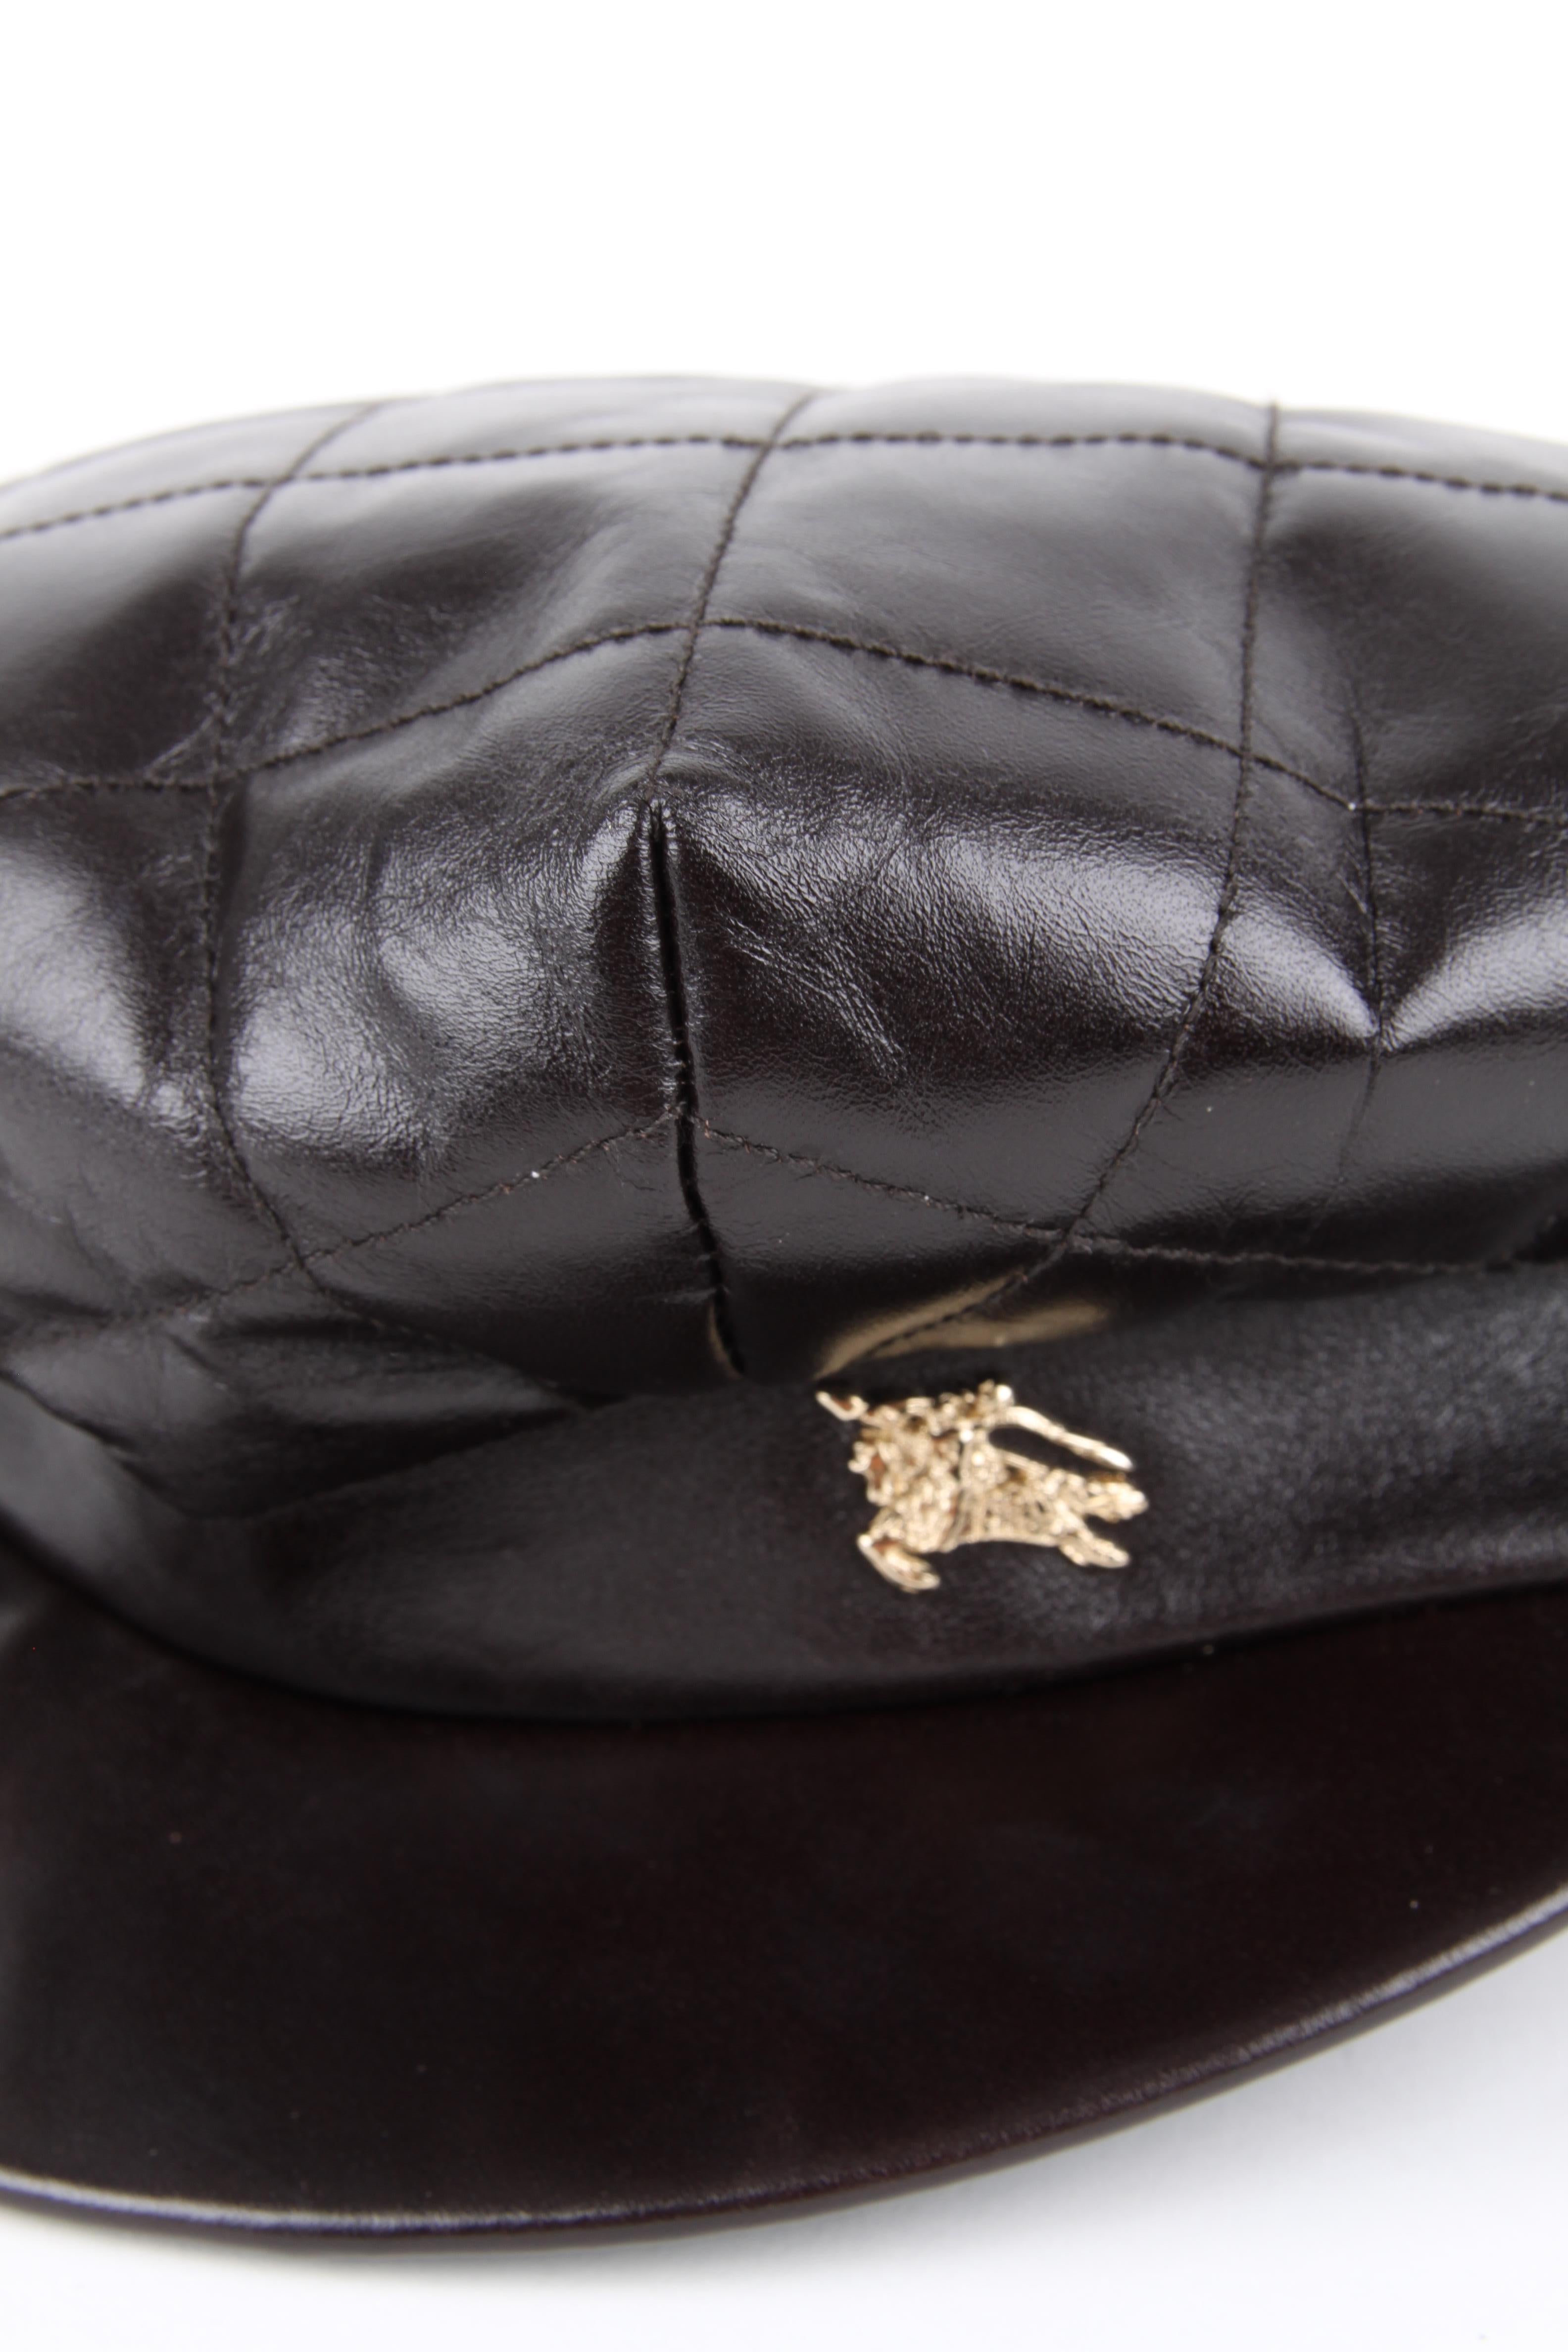 Burberry Leather Hat In Good Condition For Sale In Baarn, NL